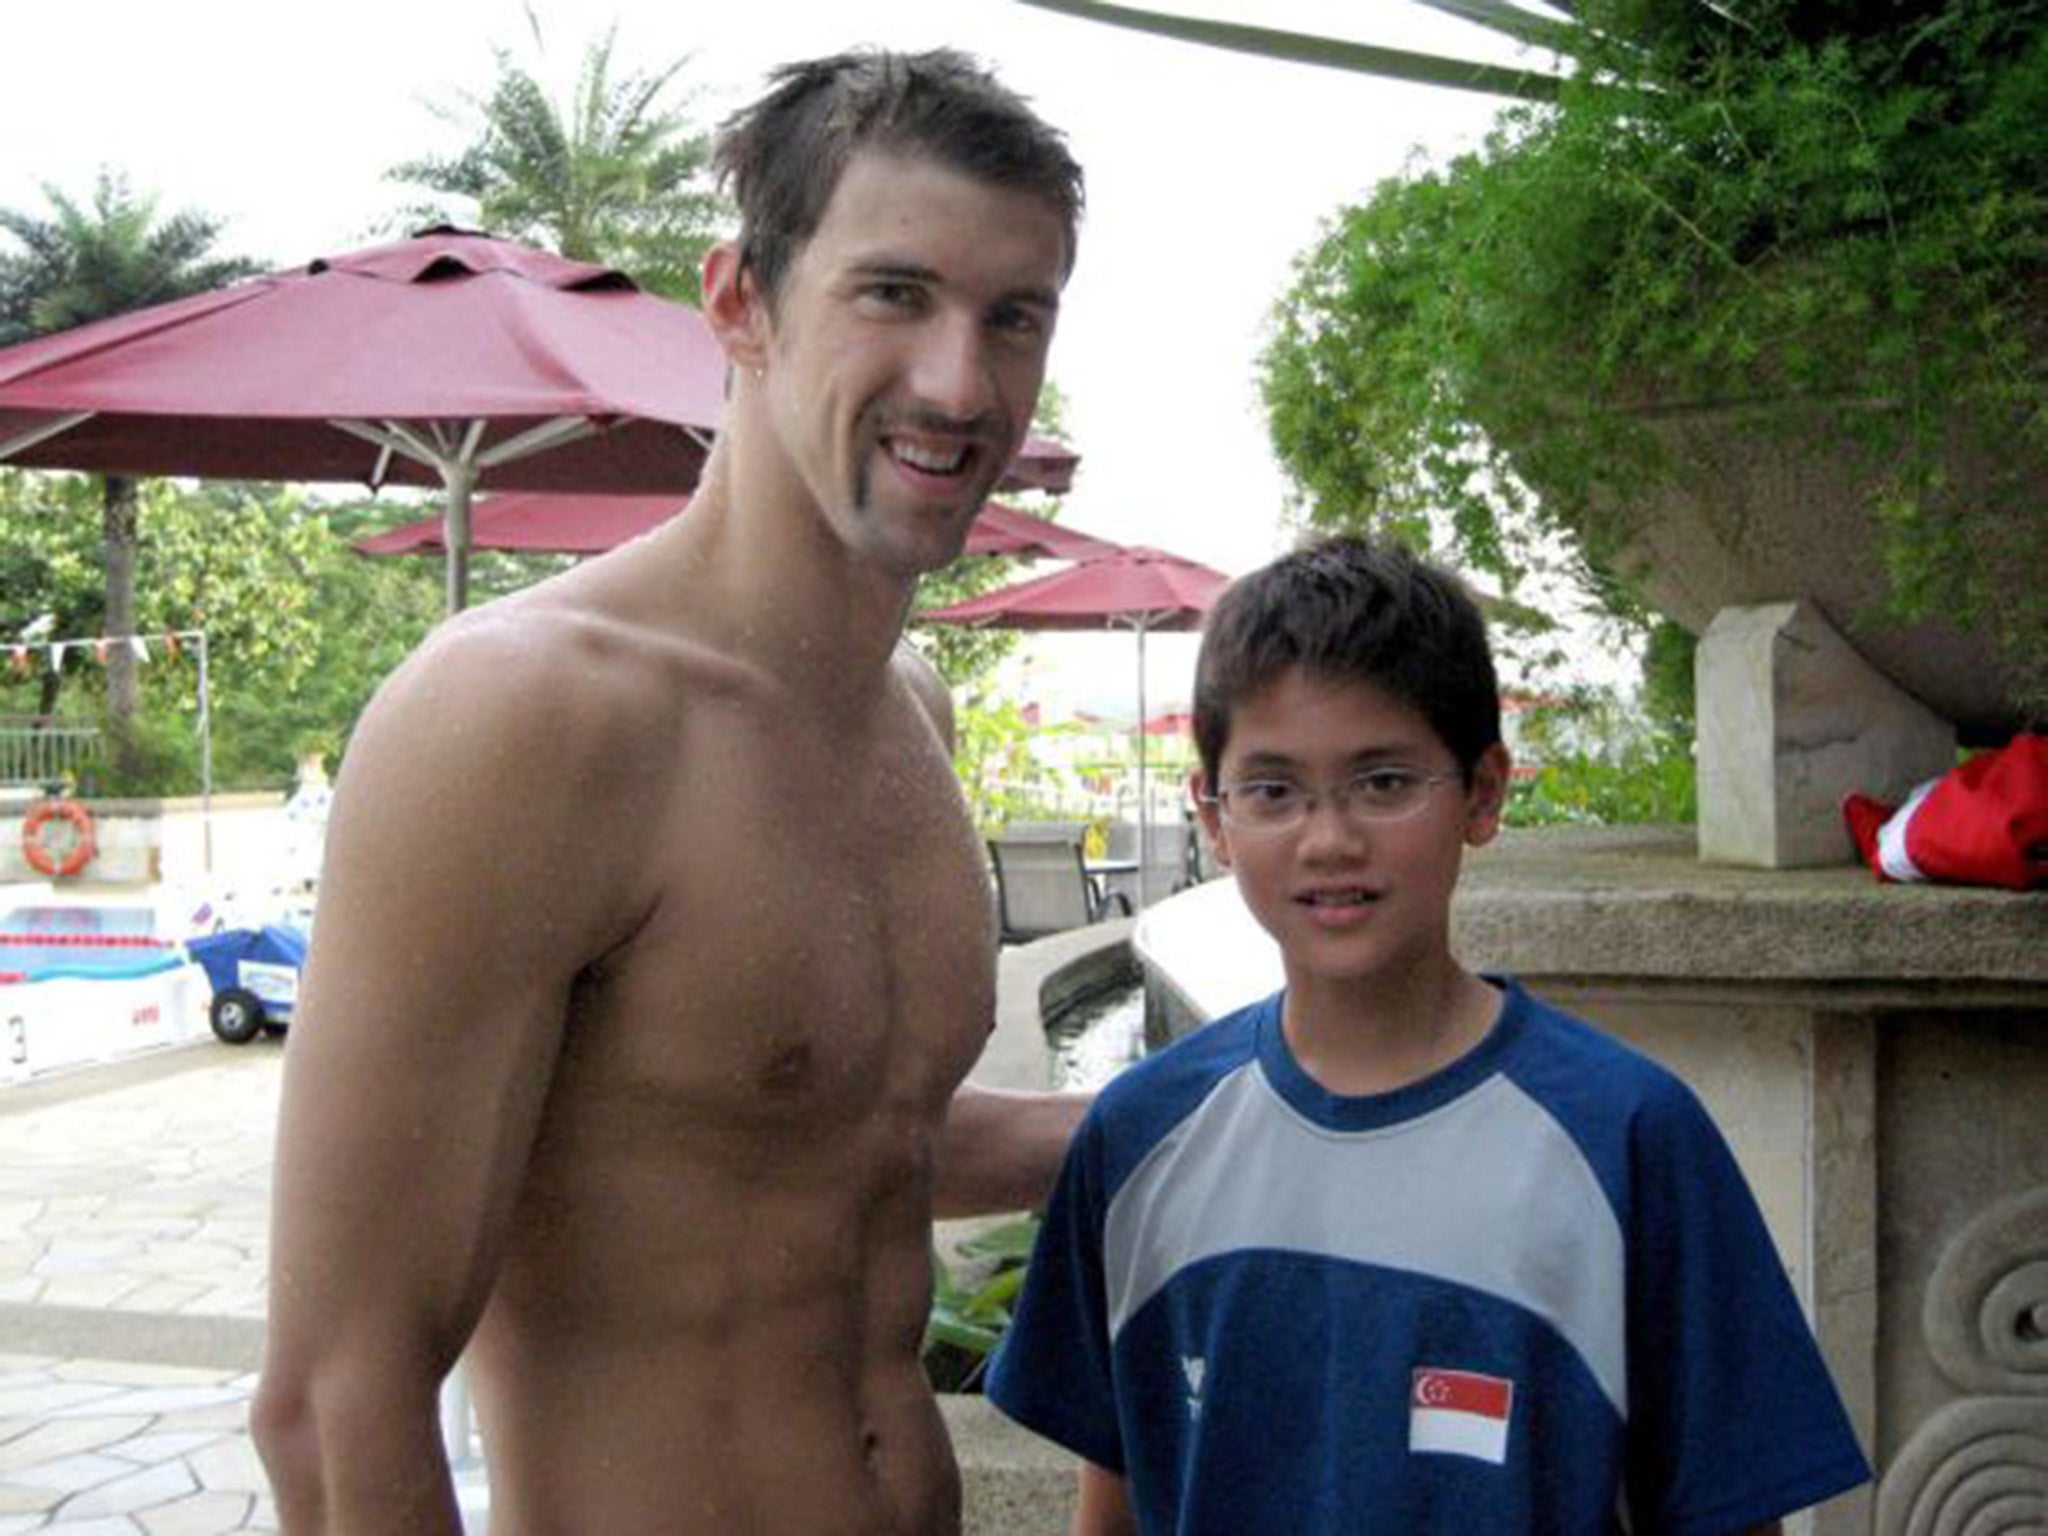 Joseph Schooling, pictured with Michael Phelps in 2008, won the 100m butterfly gold medal at Rio 2016